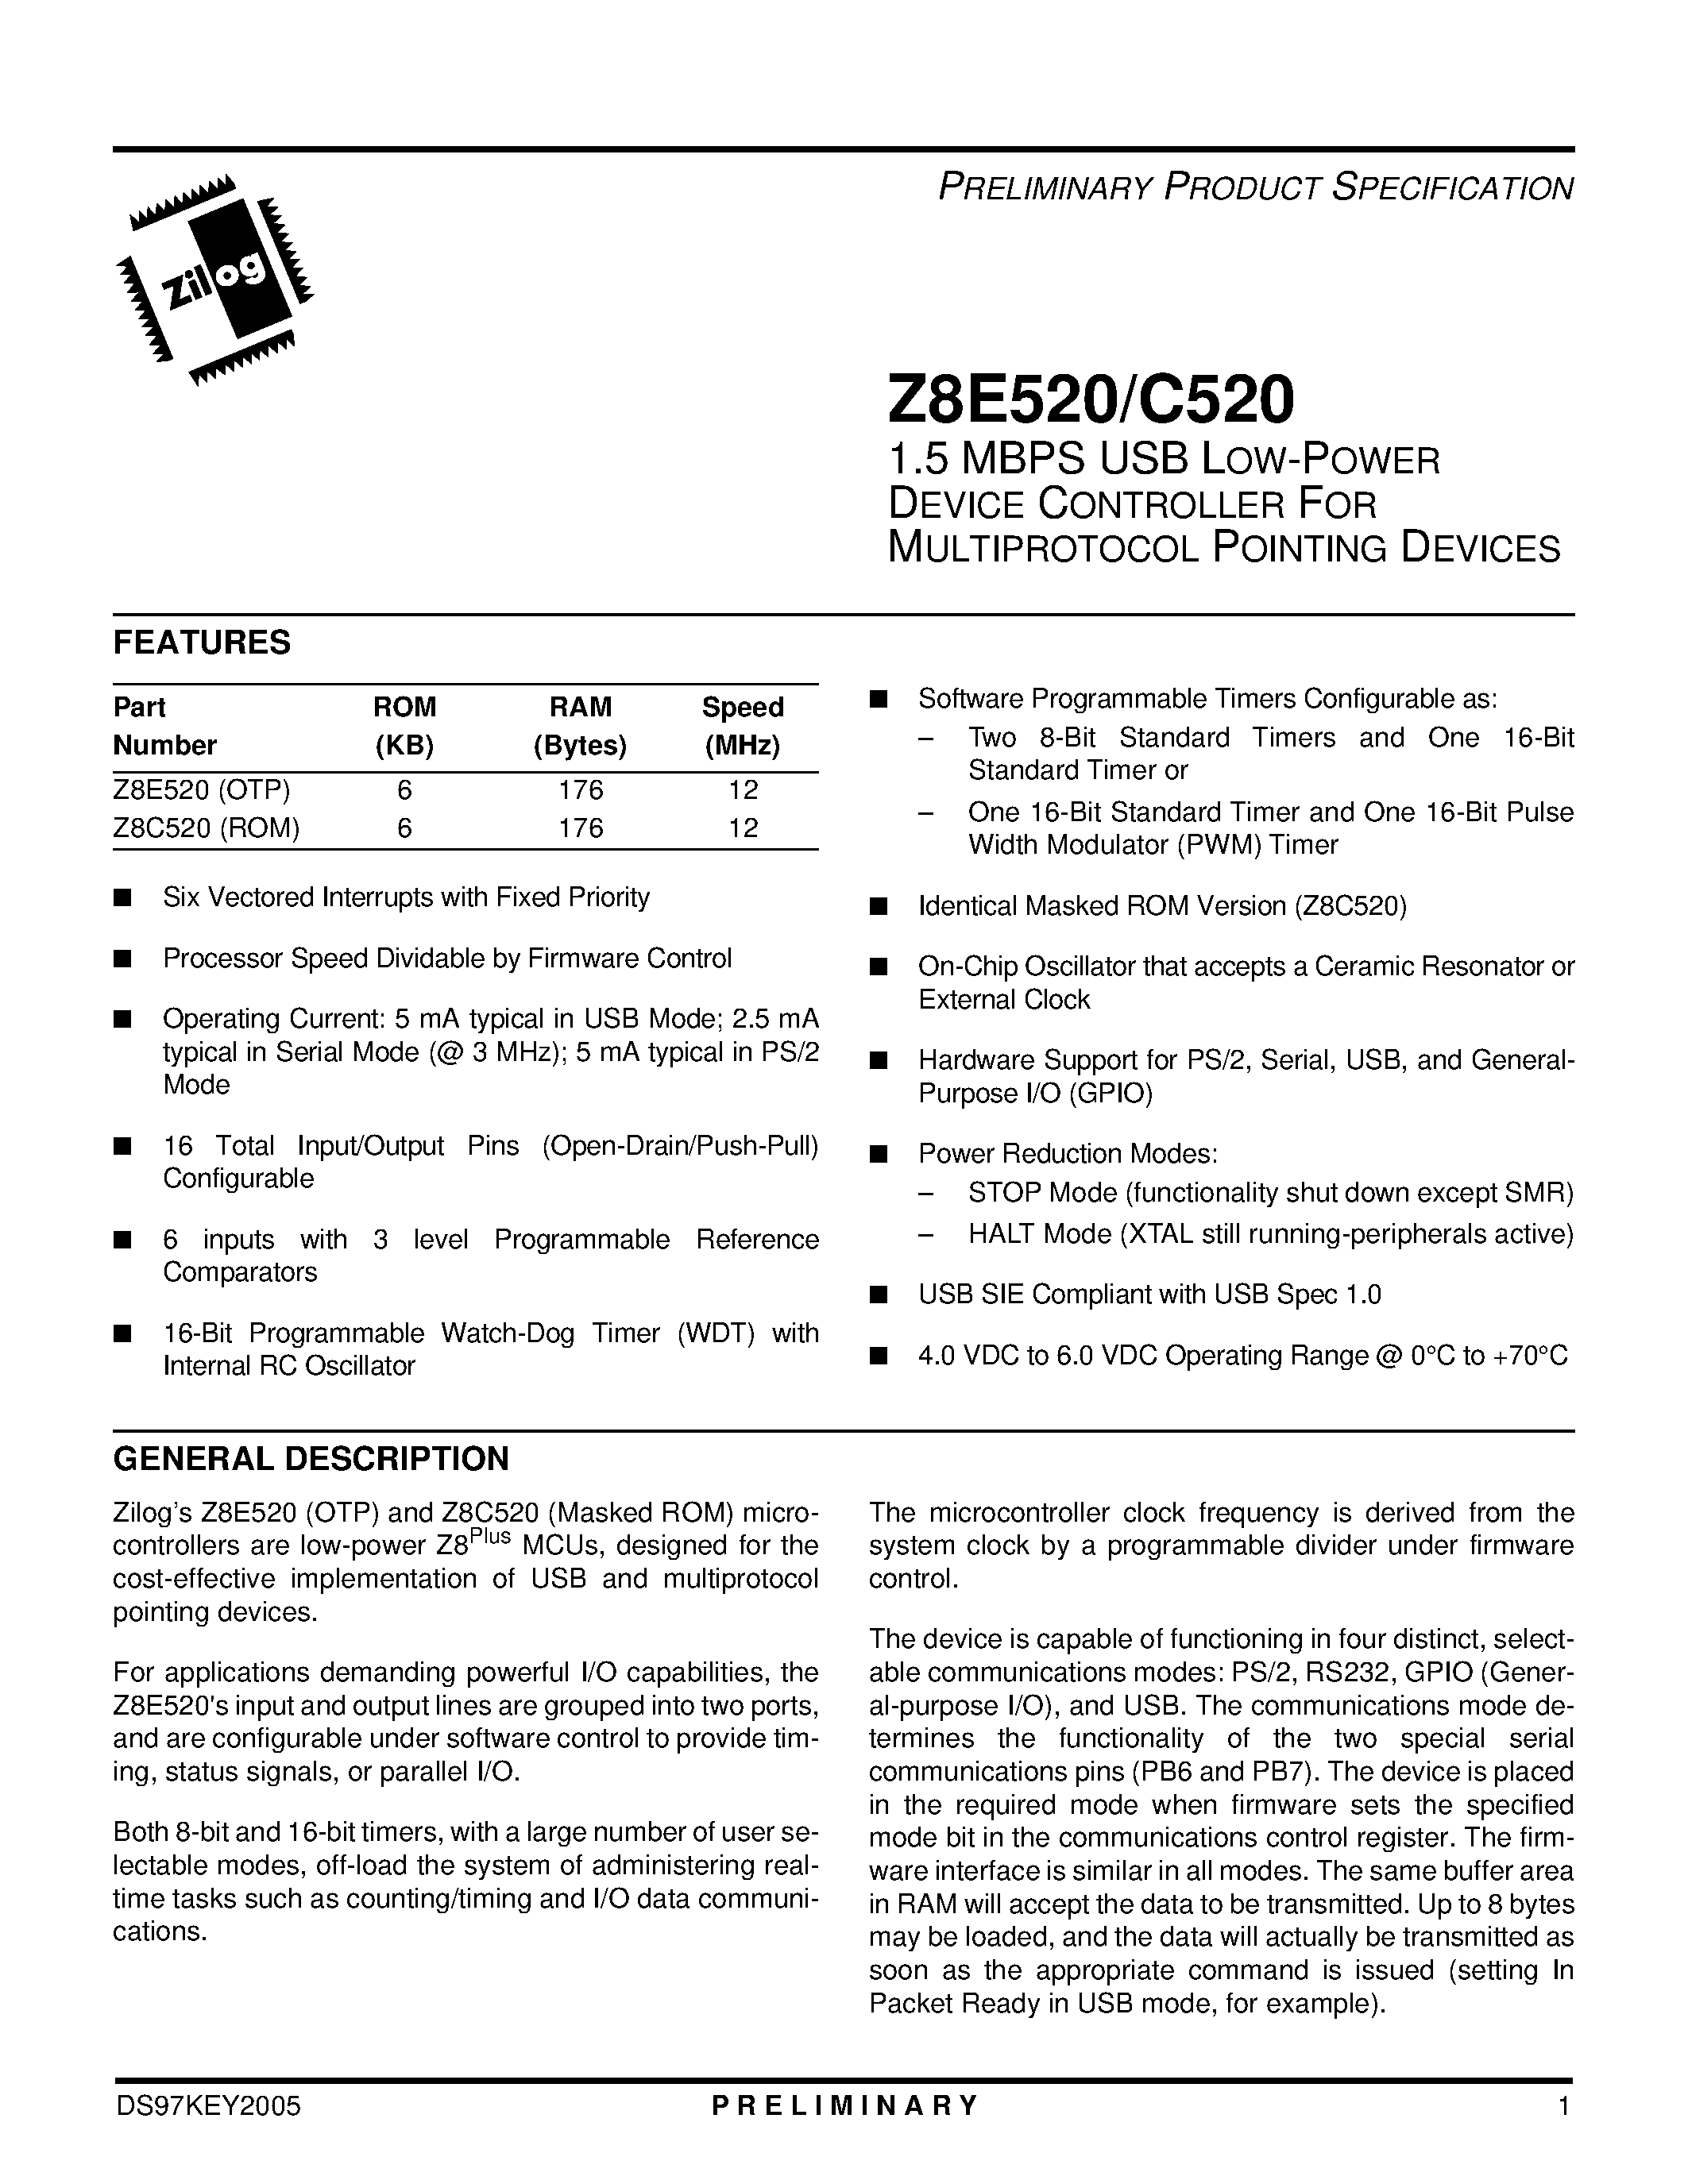 Datasheet Z8C520 - 1.5 MBPS USB Device Controller page 1